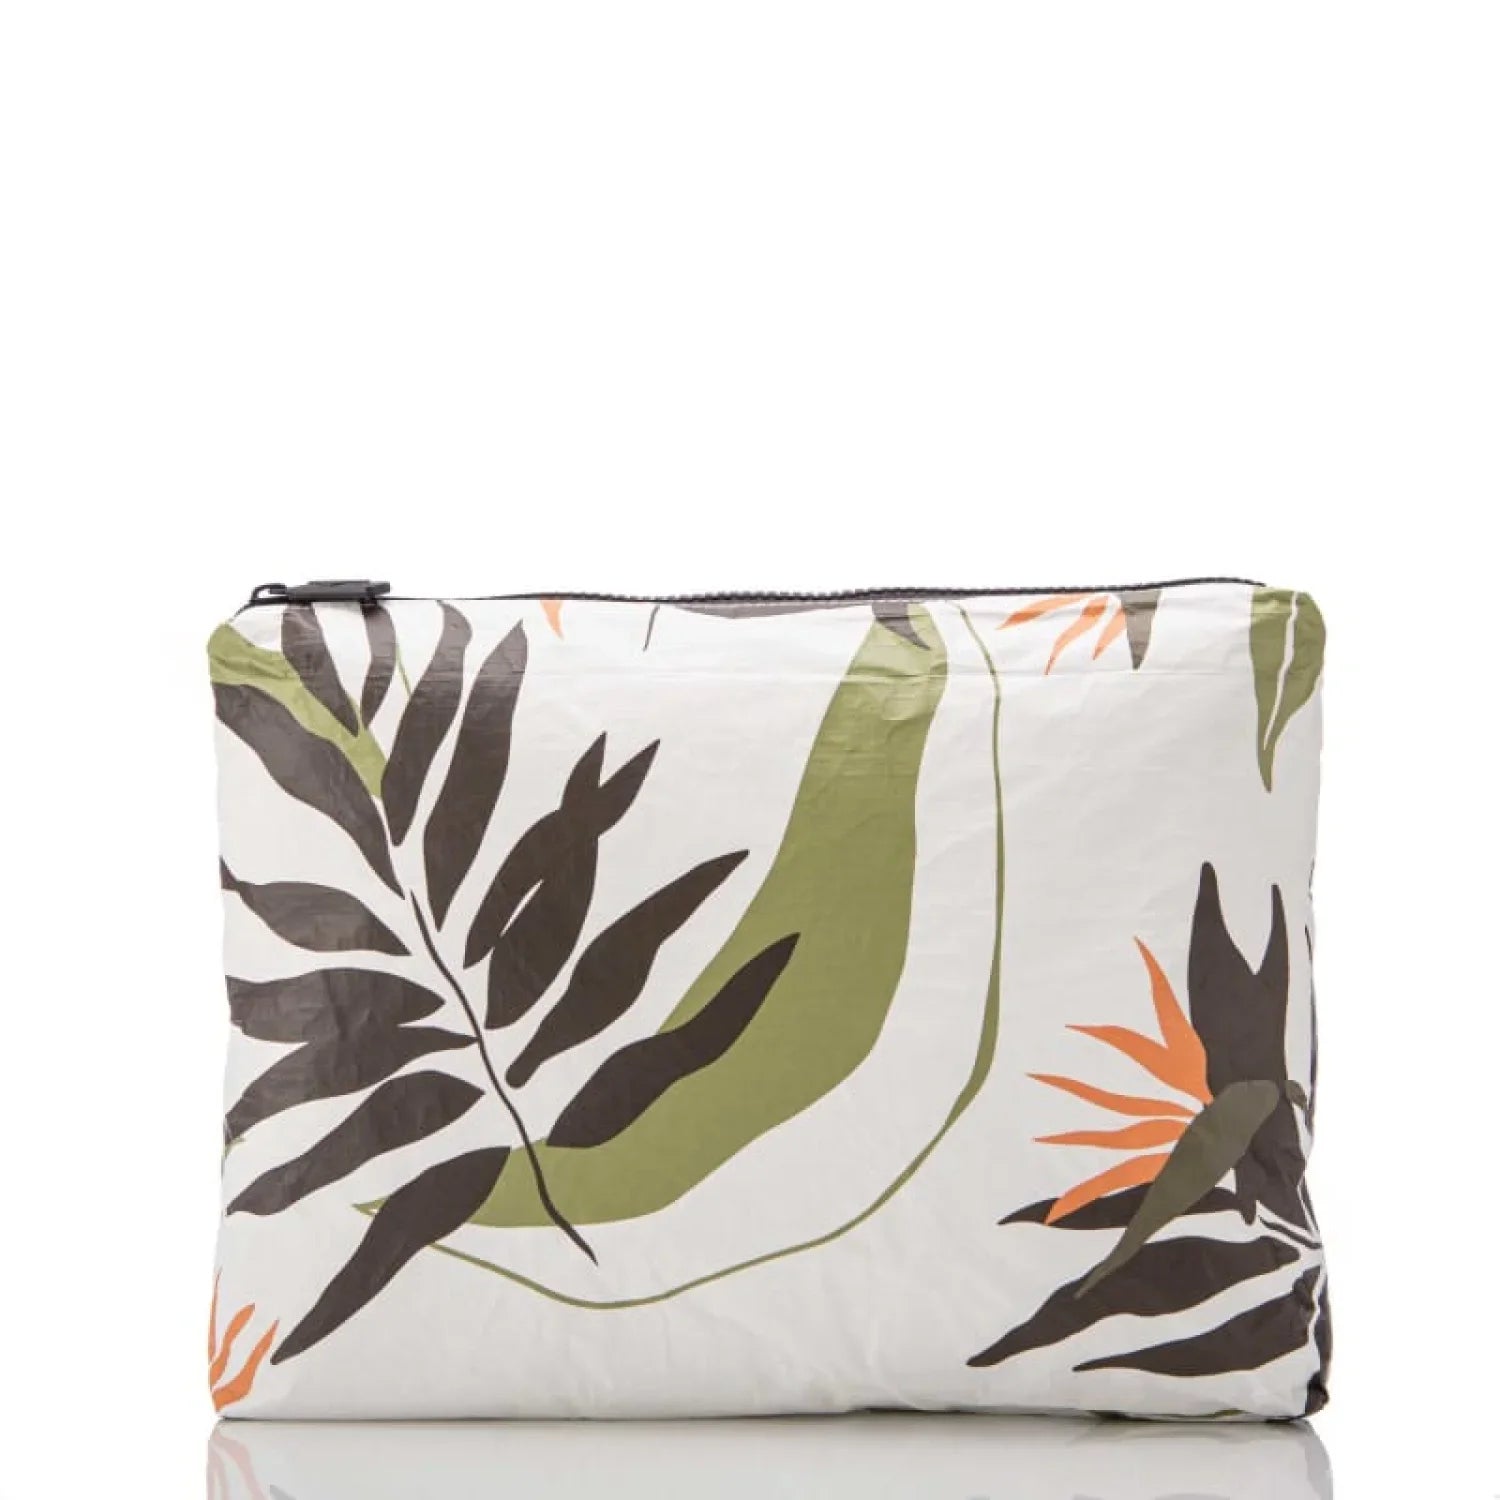 Aloha PACKS|LUGGAGE - PACK|CASUAL - WAIST|SLING|MESSENGER|PURSE Mid Pouch PAINTED BIRDS NEUTRALS OS